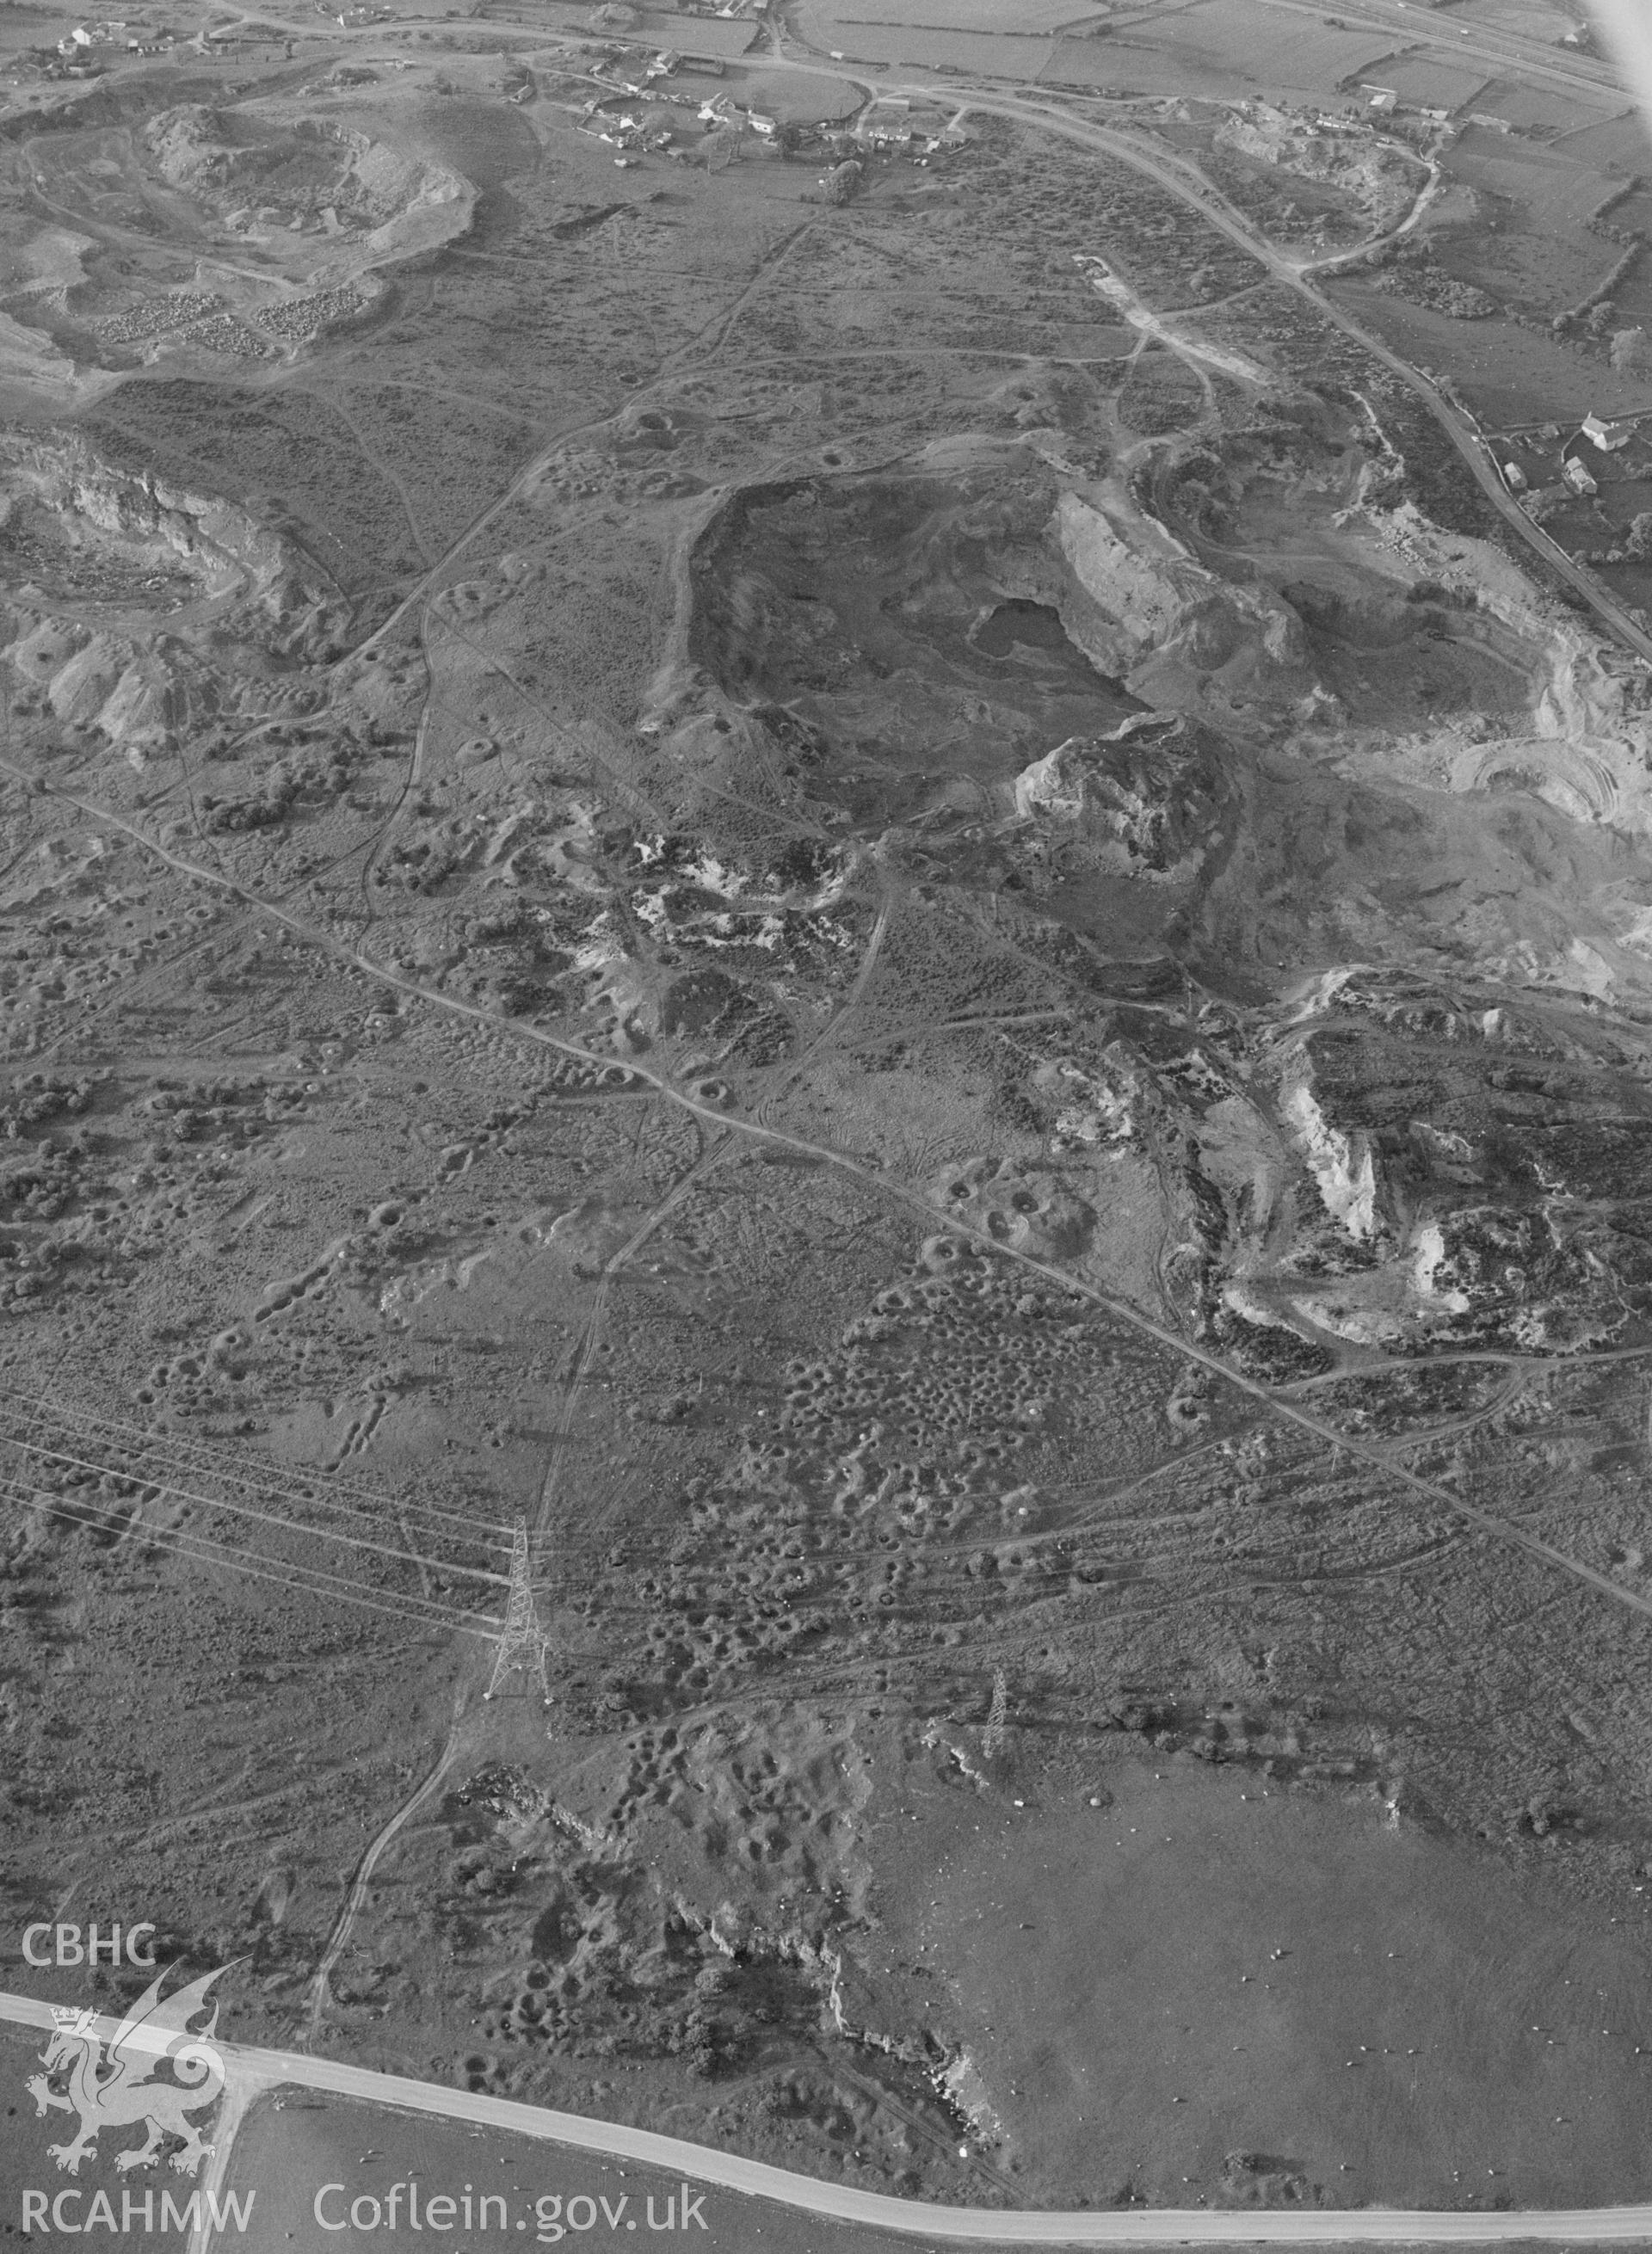 RCAHMW Black and white oblique aerial photograph of Halkyn Mountain, 1993, by C.R. Musson.